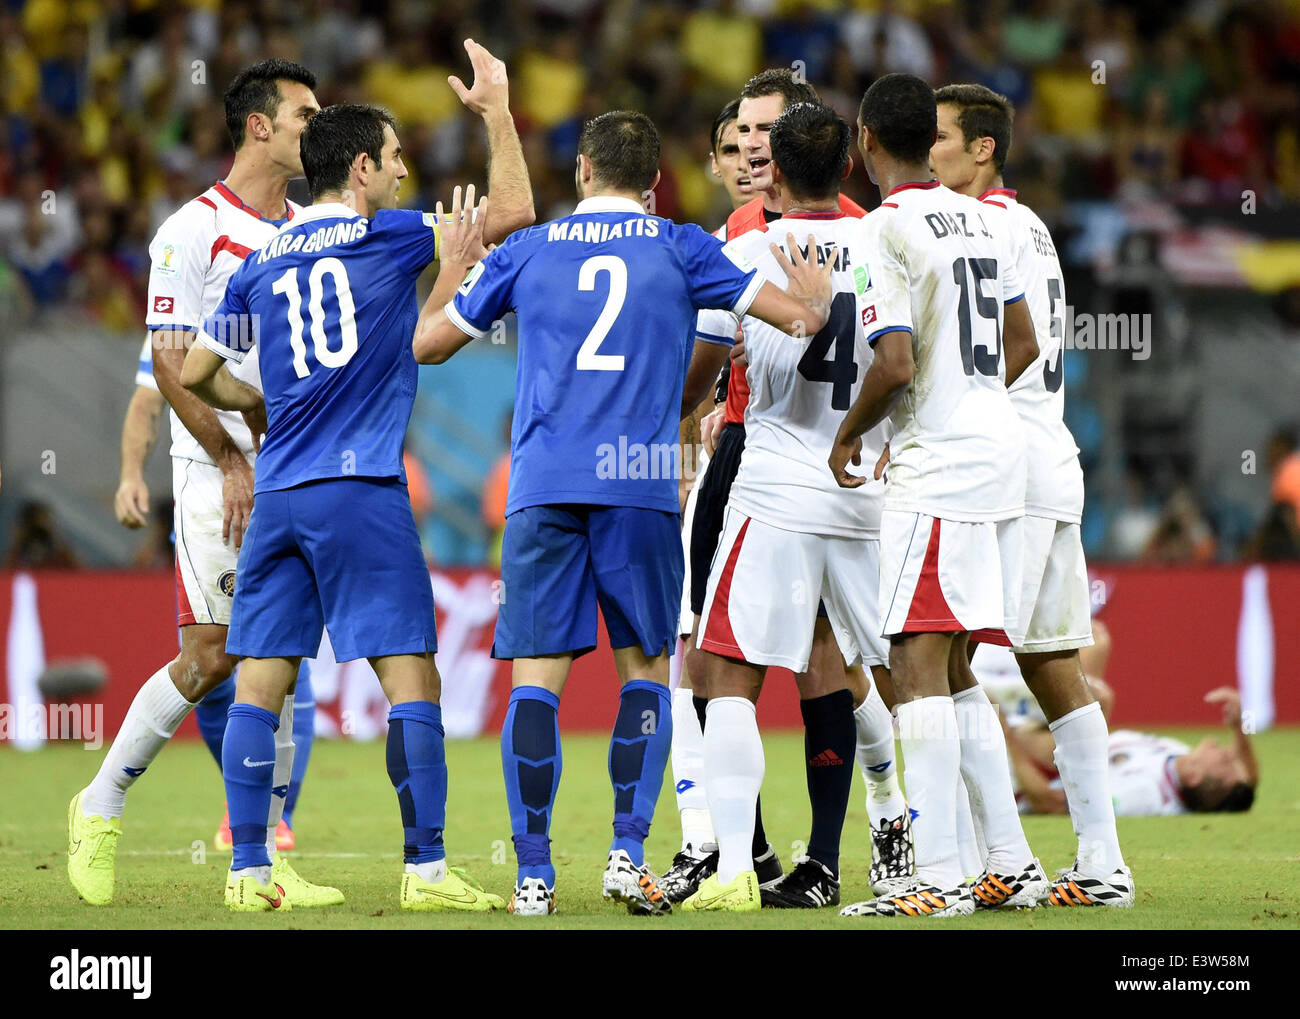 Recife, Brazil. 29th June, 2014. Greece's Giorgos Karagounis (2nd L) argues with Australia's referee Benjamin Williams (4th R) during a Round of 16 match between Costa Rica and Greece of 2014 FIFA World Cup at the Arena Pernambuco Stadium in Recife, Brazil, on June 29, 2014. Credit:  Lui Siu Wai/Xinhua/Alamy Live News Stock Photo